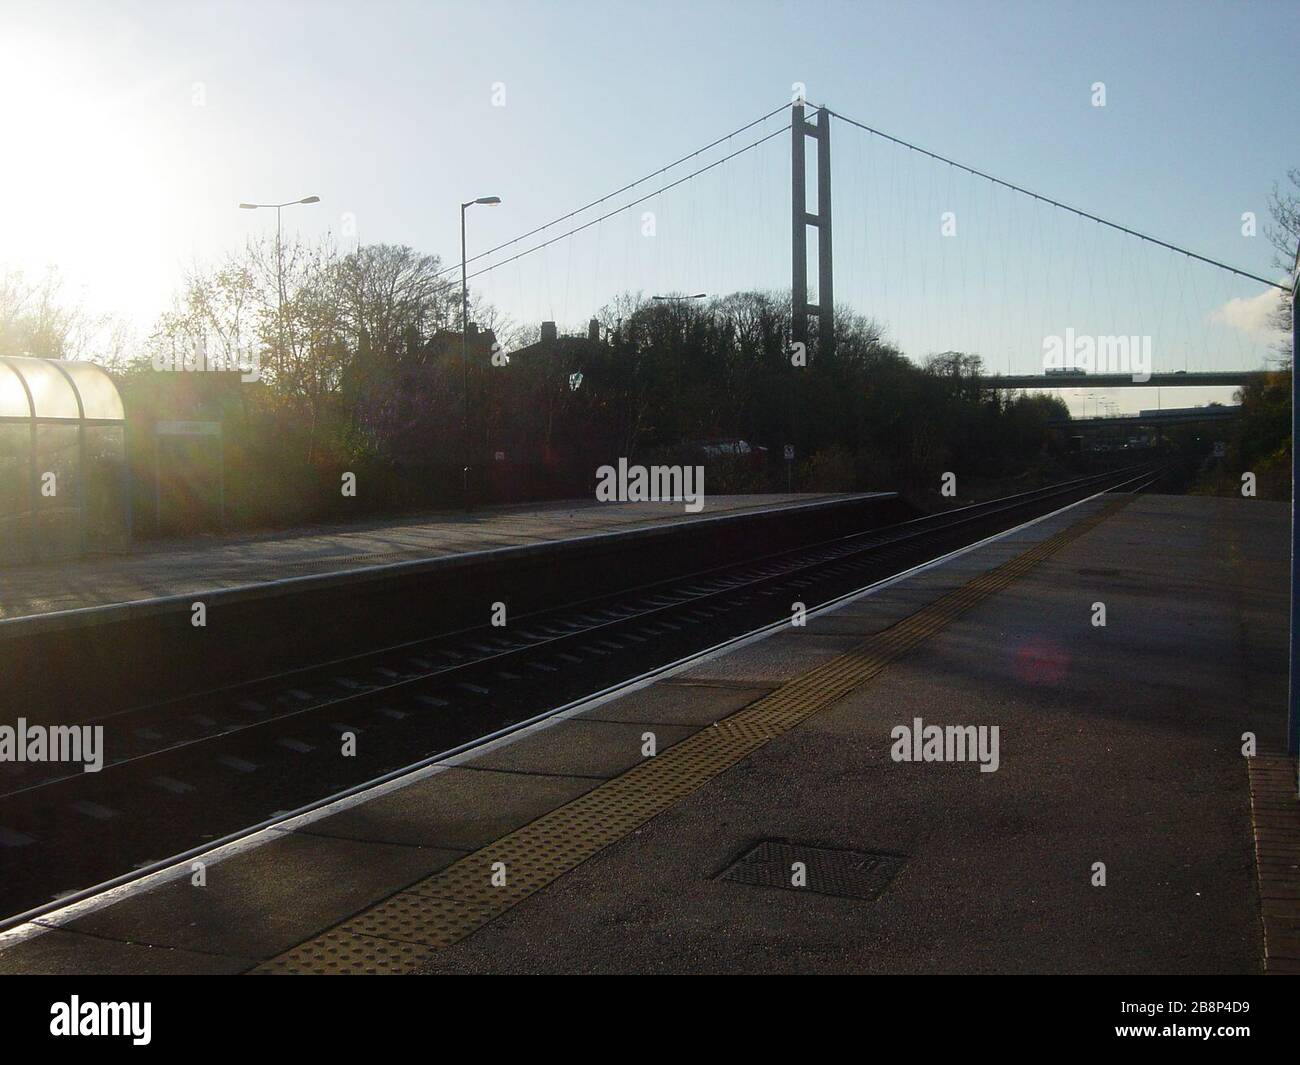 'English: The Humber Bridge from Platform Two of Hessle railway station, Hessle, East Riding of Yorkshire, England. Author: Anthony Shreeve; 8 December 2005; Transferred from en.wikipedia to Commons by RHaworth using CommonsHelper.; Pa-merynaten at English Wikipedia; ' Stock Photo